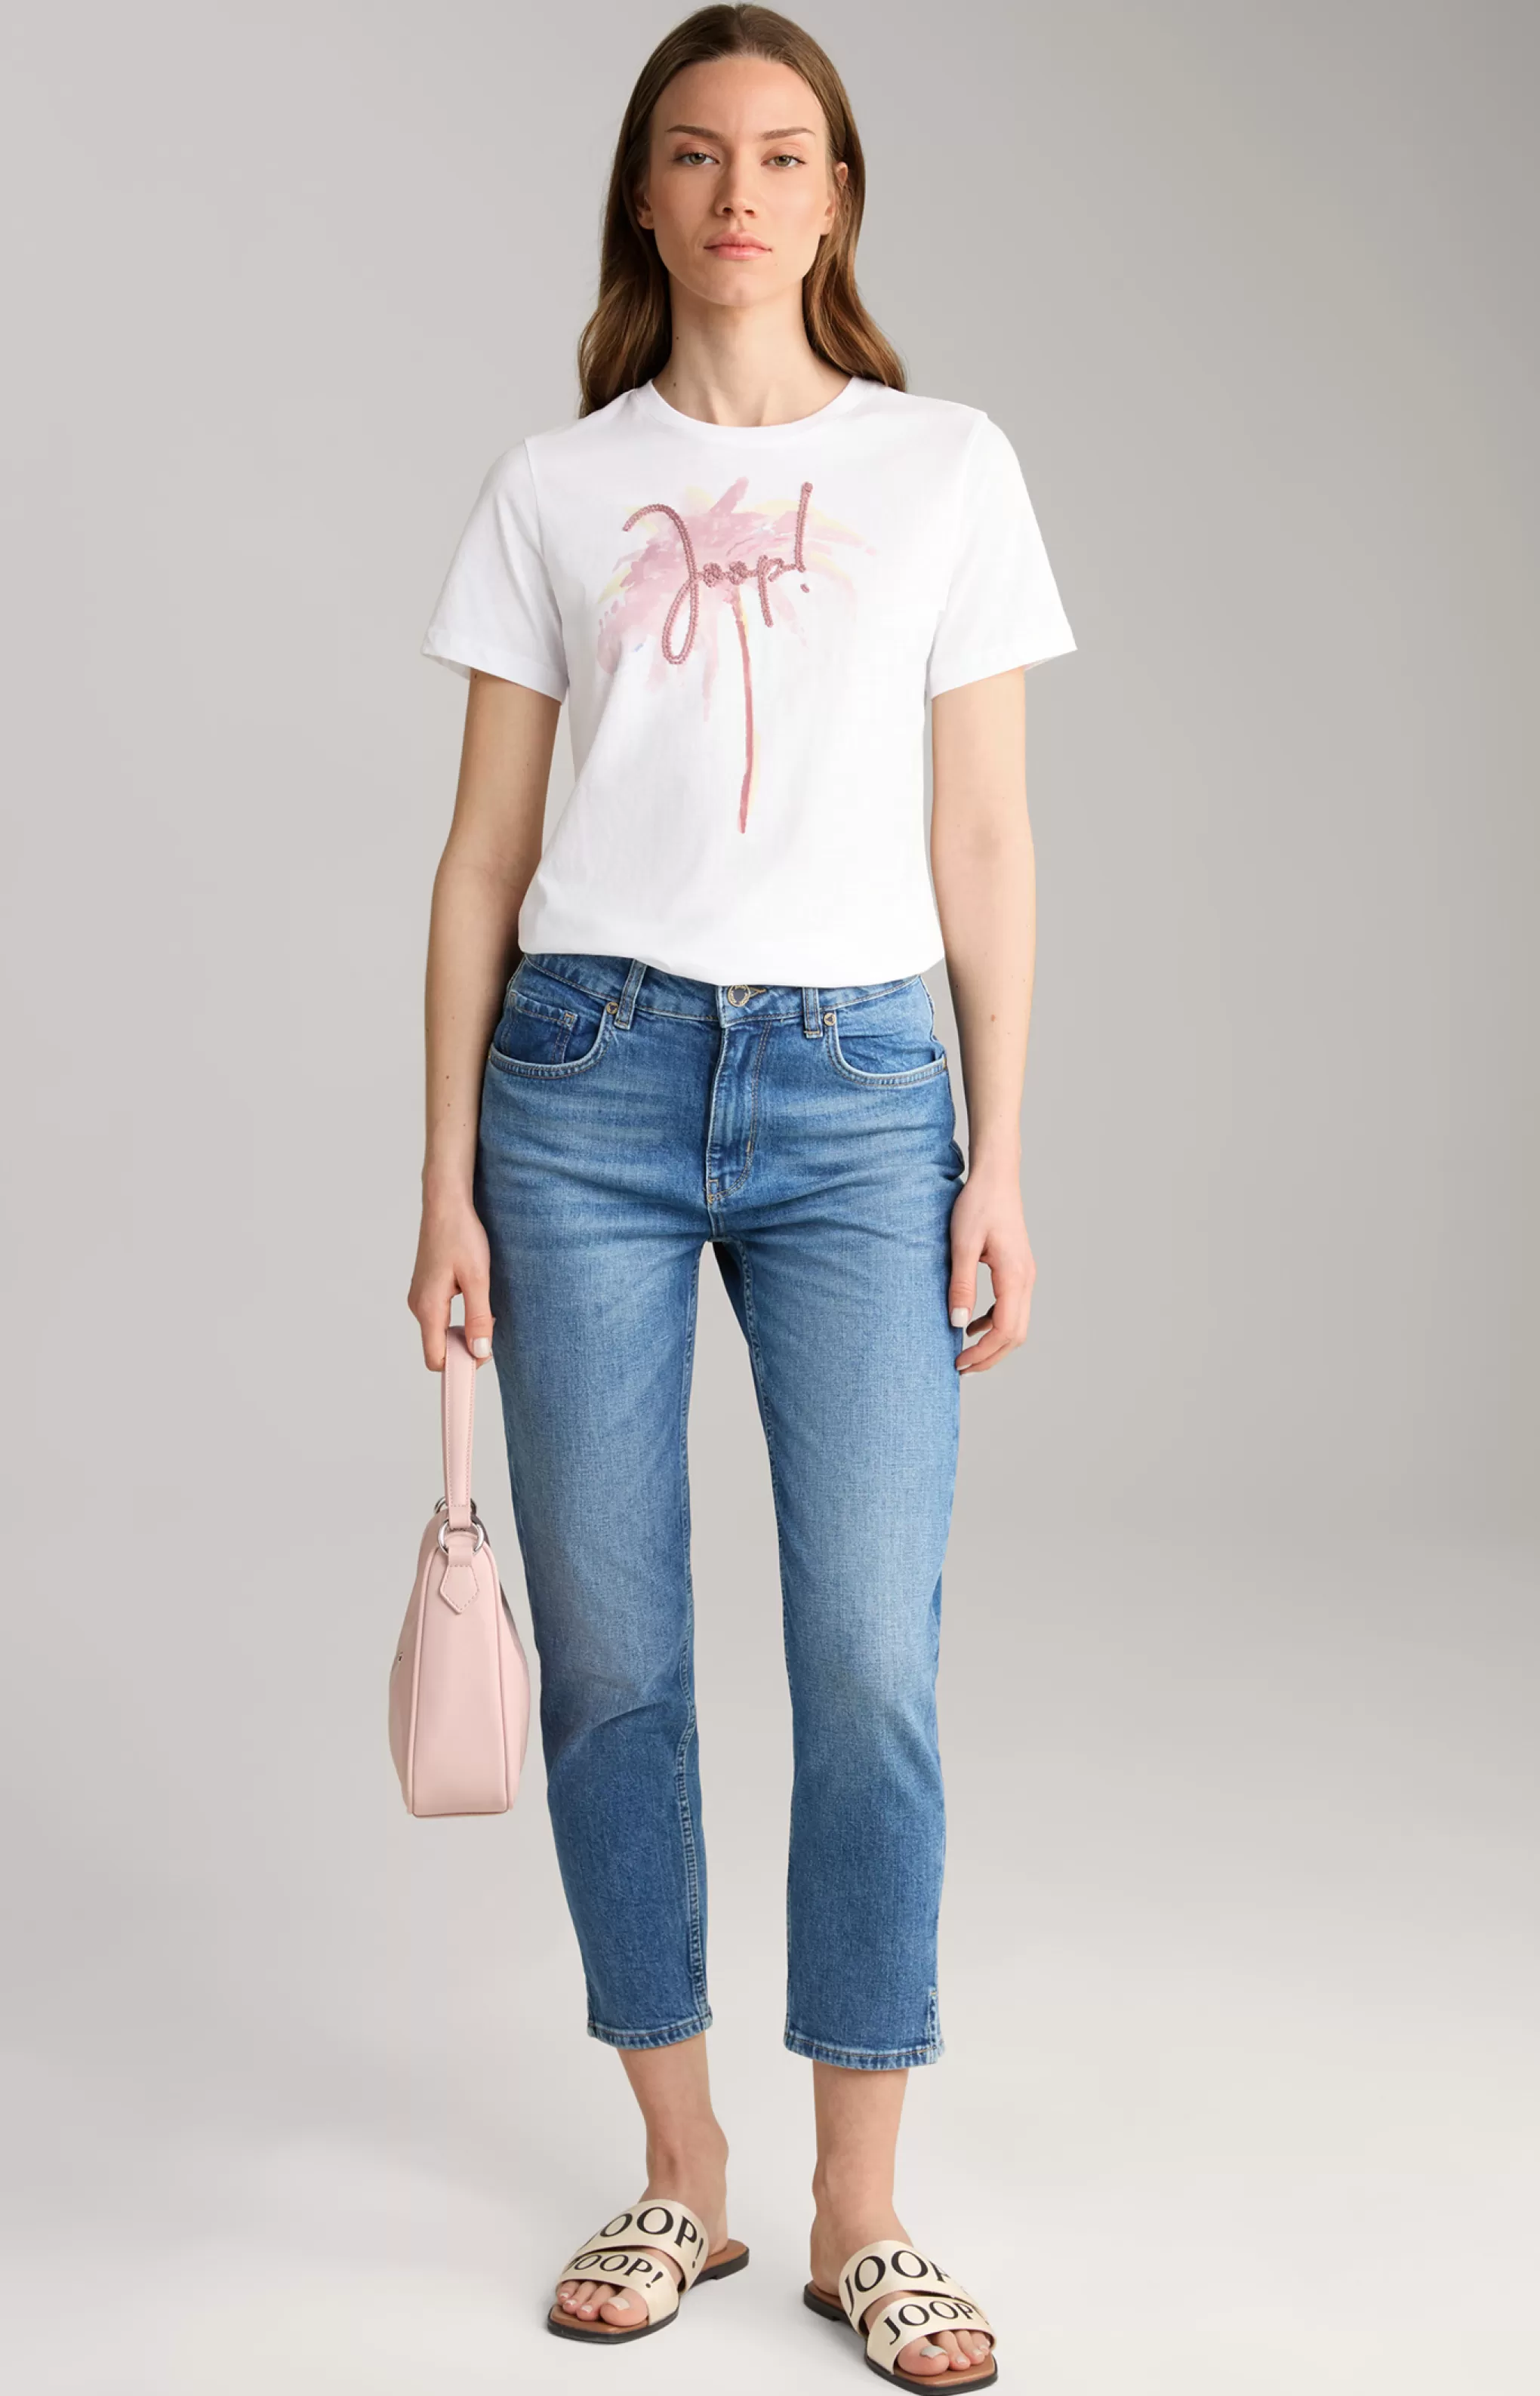 Shirts & Sweats | T-shirts*JOOP Shirts & Sweats | T-shirts Cotton T-shirt in /Dusky Pink